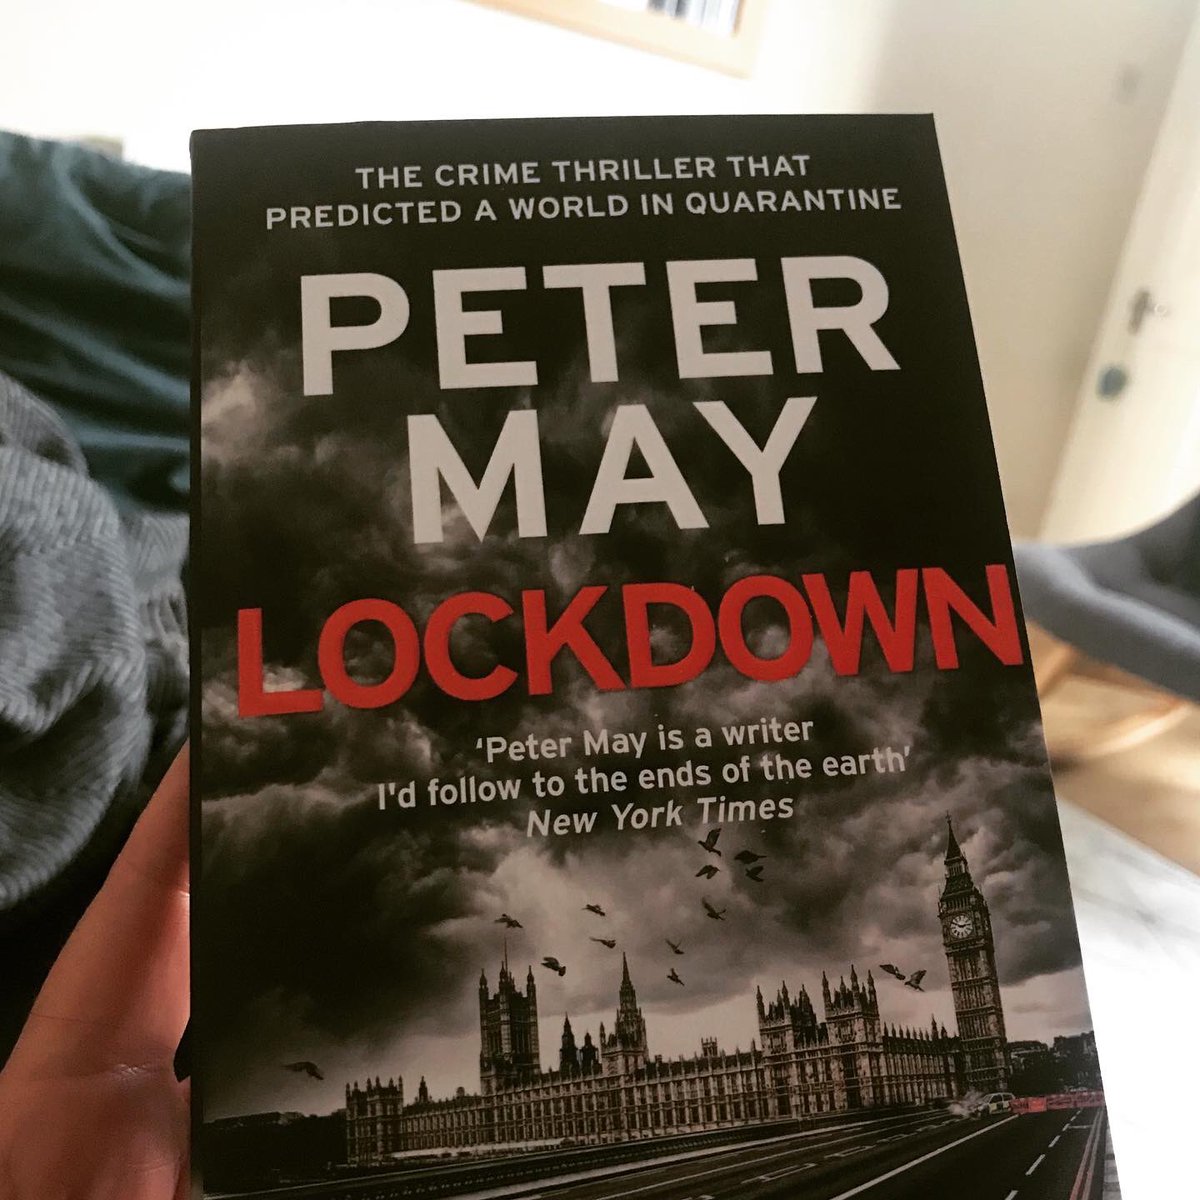 Book 17: Lockdown - Peter May Thrillers are not normally my genre but I’m addicted to May’s books after loving the Black House trilogy. This one written 15 yrs ago is set in a pandemic situation in London but wasn’t published as deemed “unrealistic”. Page turner 